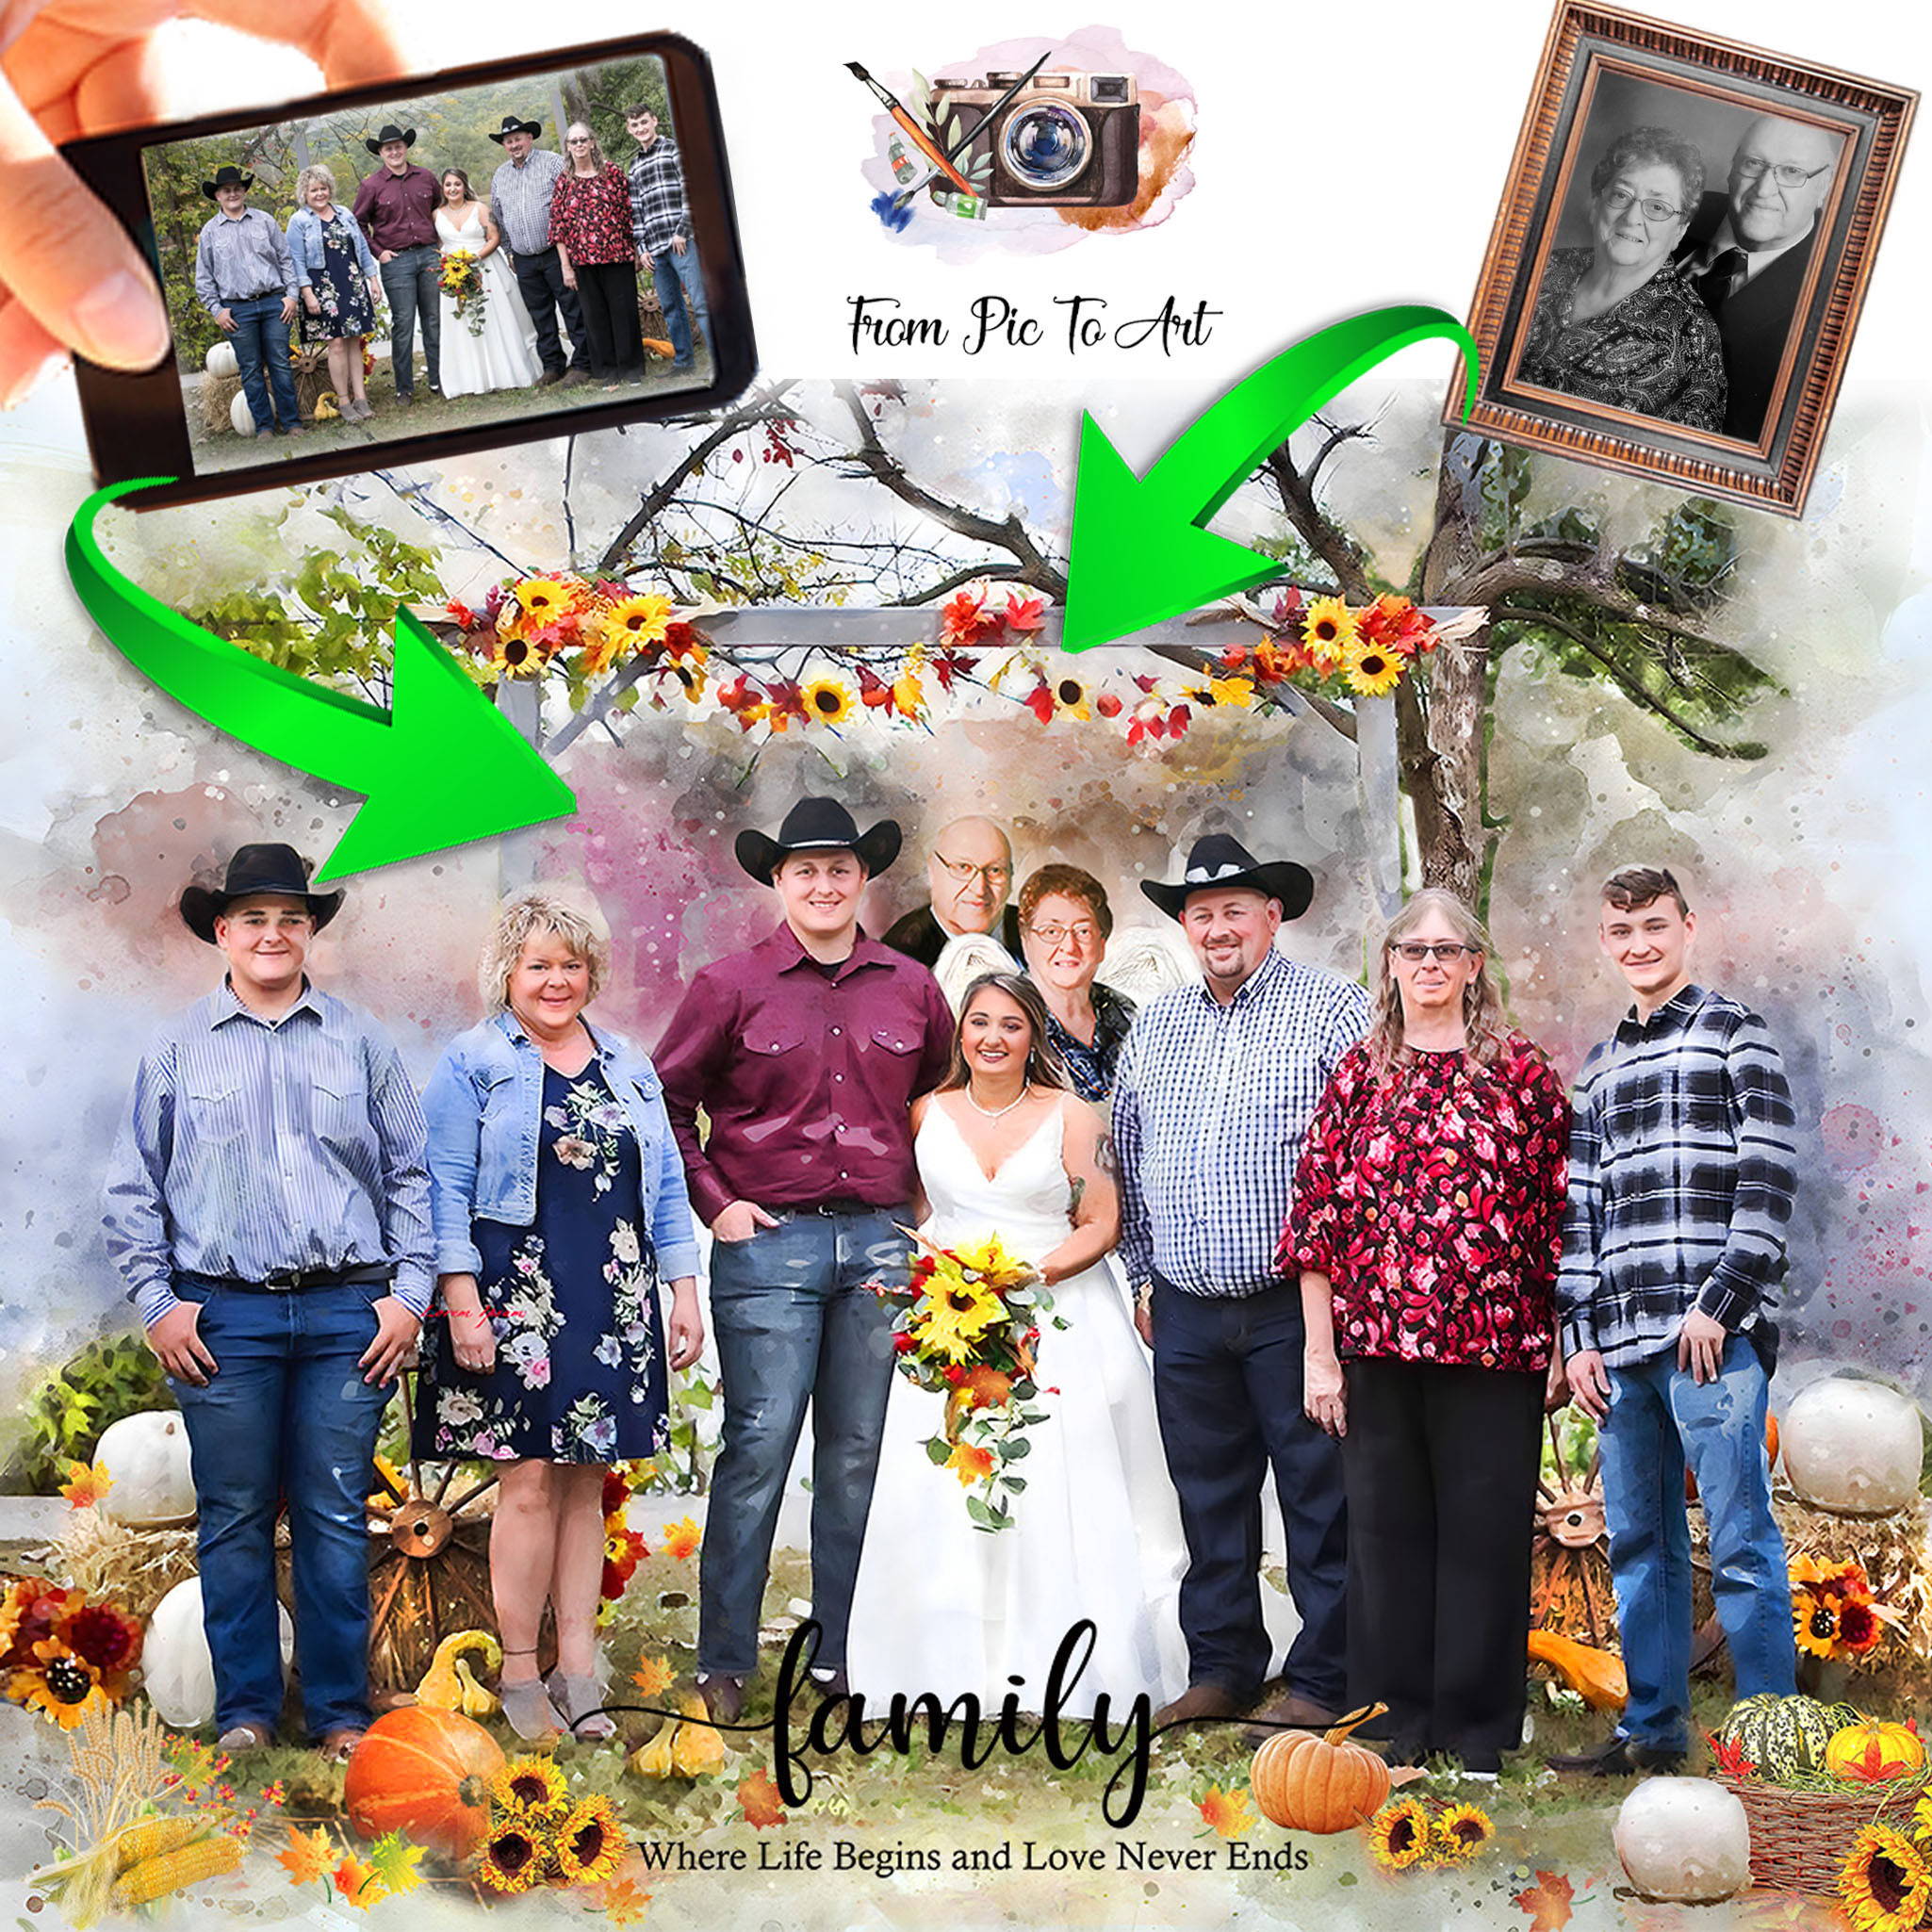 Combine Photos and Images | Merge Images to one Family Pictures with Deceased Loved On- From PicToArt